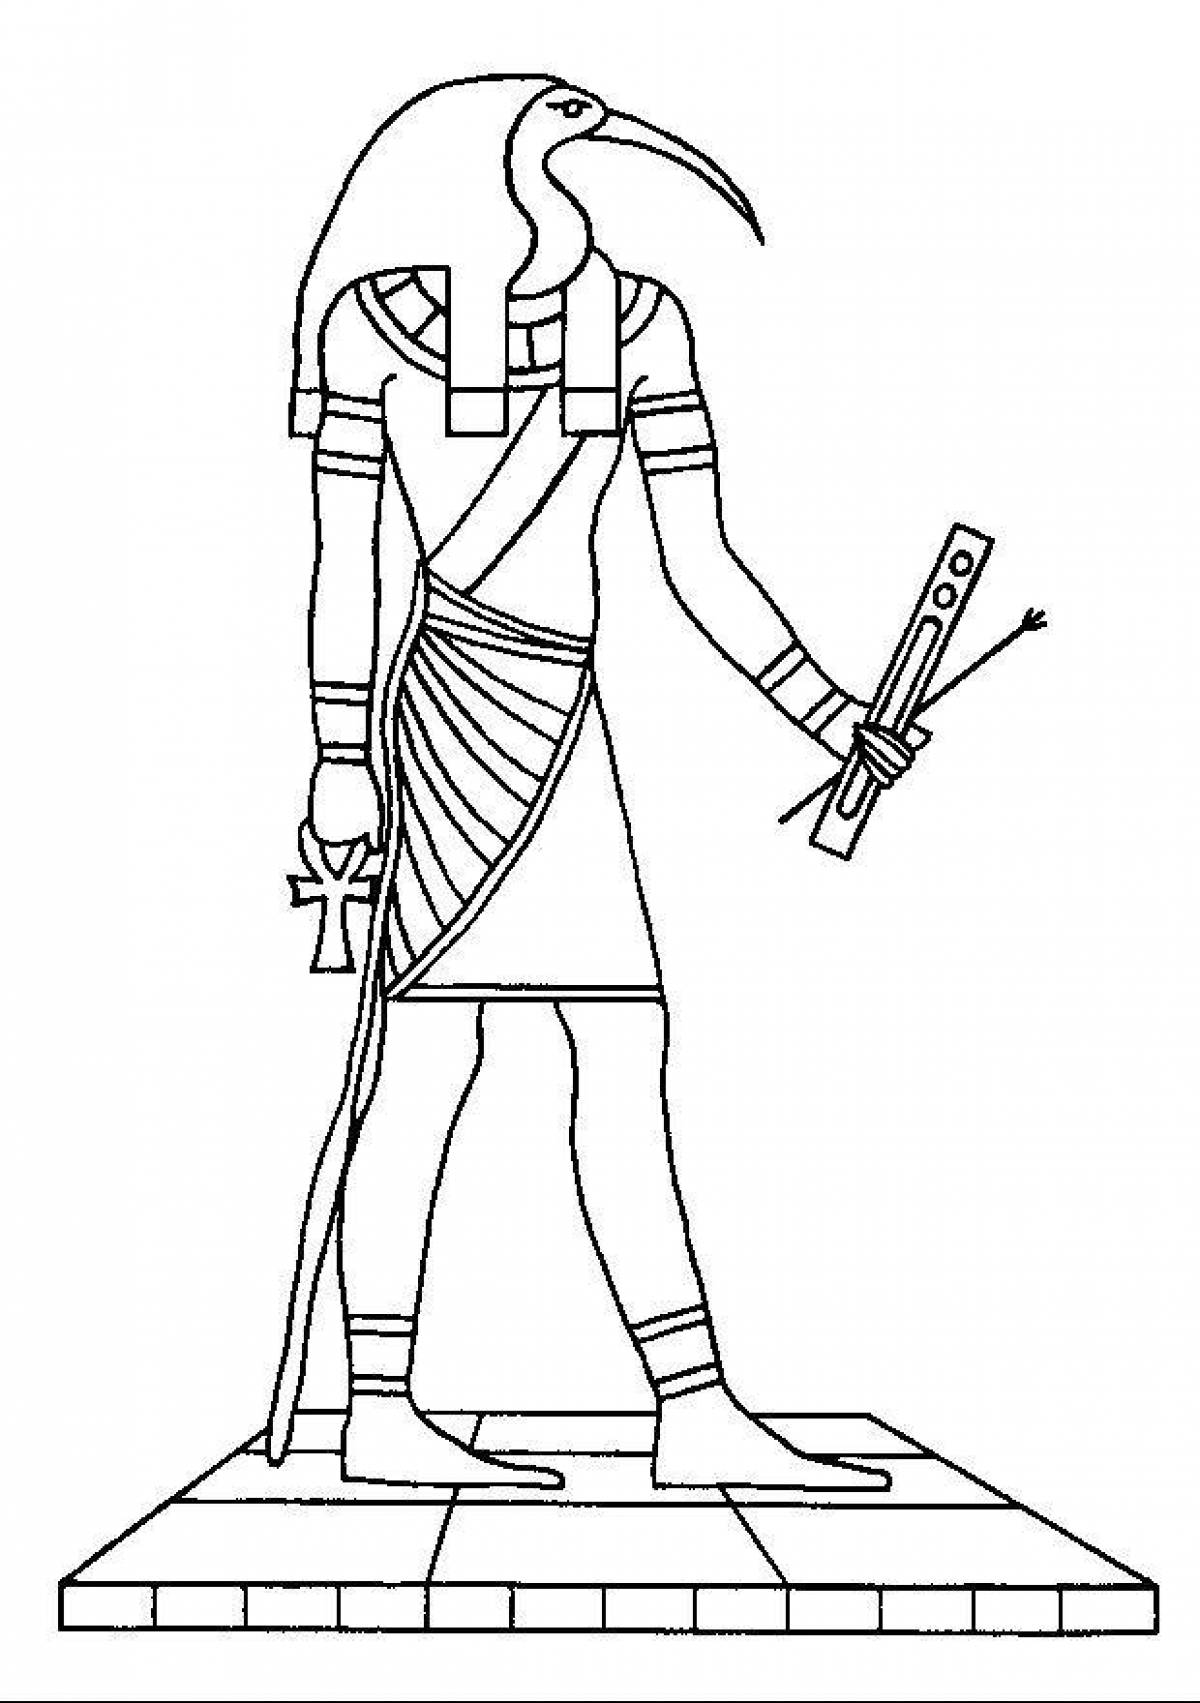 Gorgeous coloring book anubis god of ancient egypt